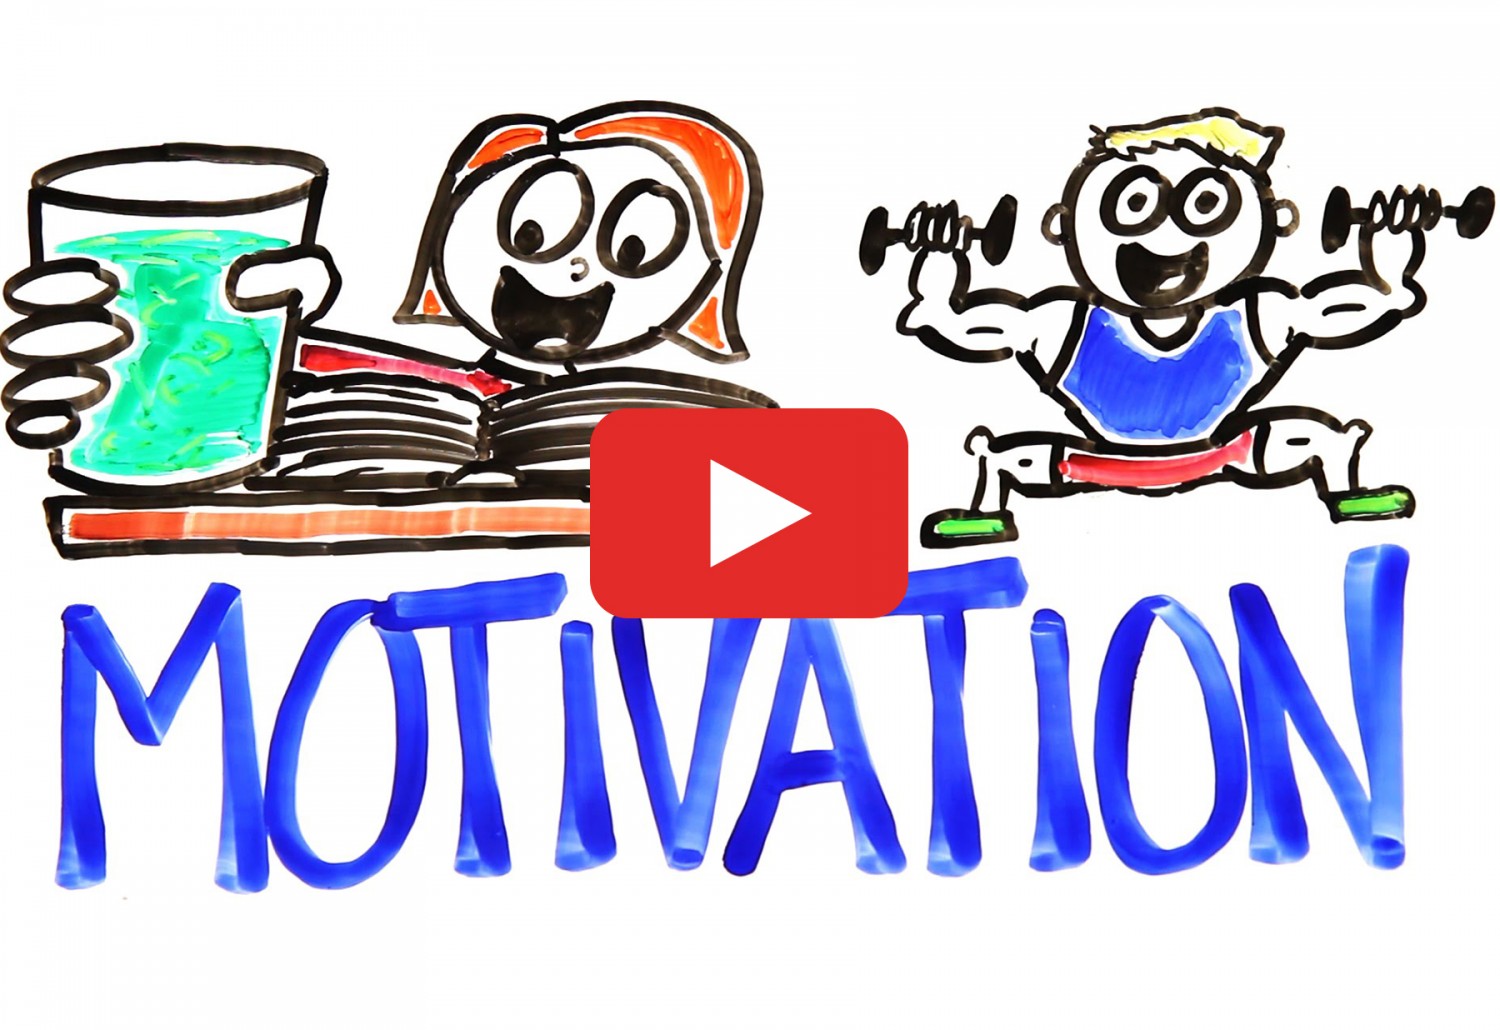 The Best Way to Stay Motivated, According to Science